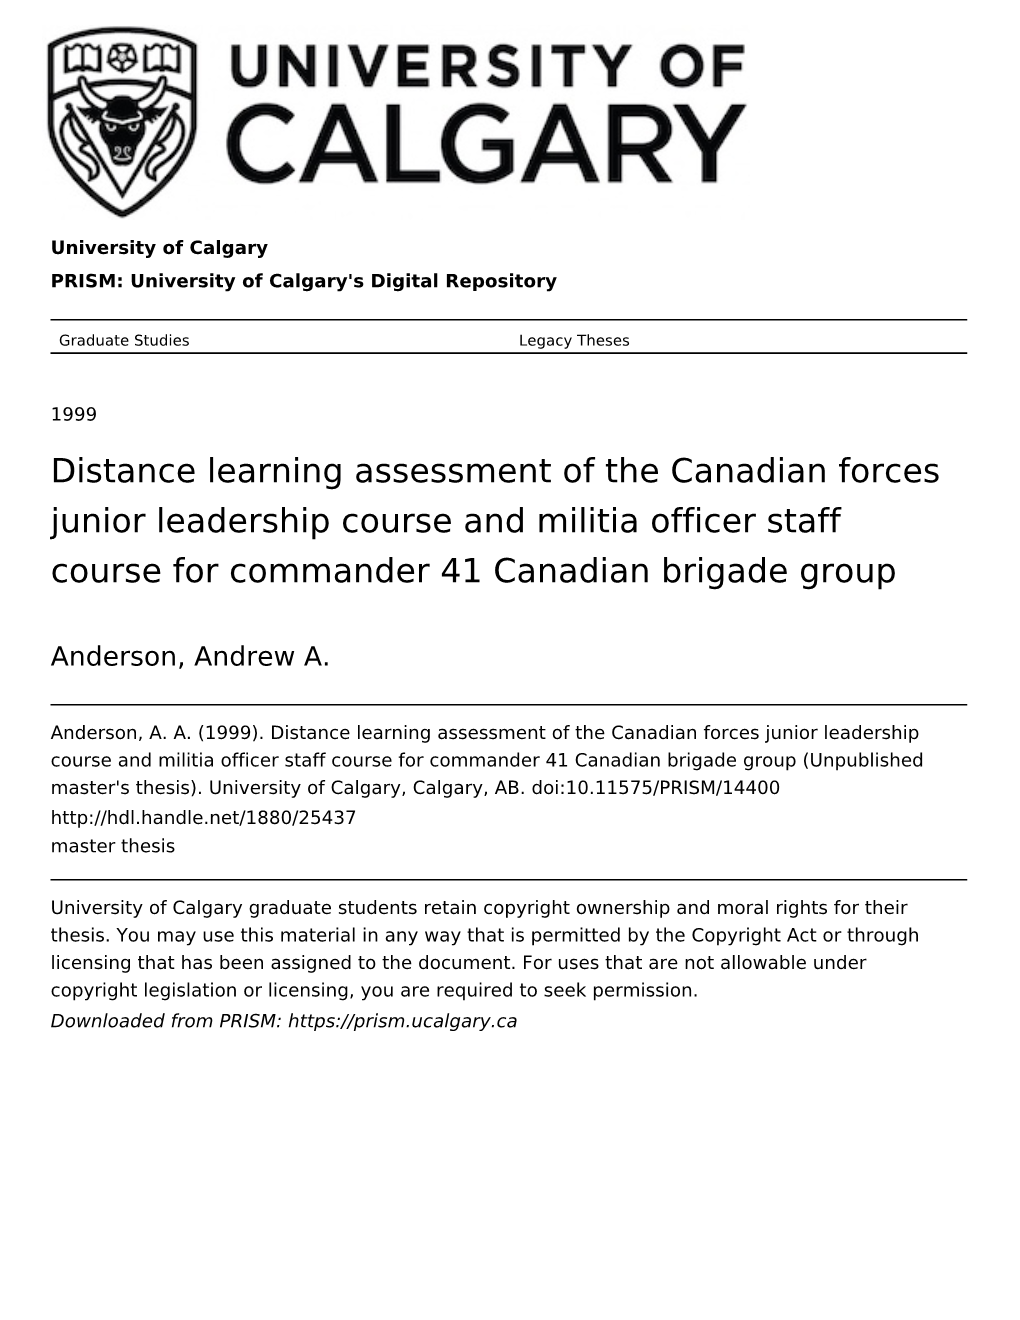 Distance Learning Assessment of the Canadian Forces Junior Leadership Course and Militia Officer Staff Course for Commander 41 Canadian Brigade Group